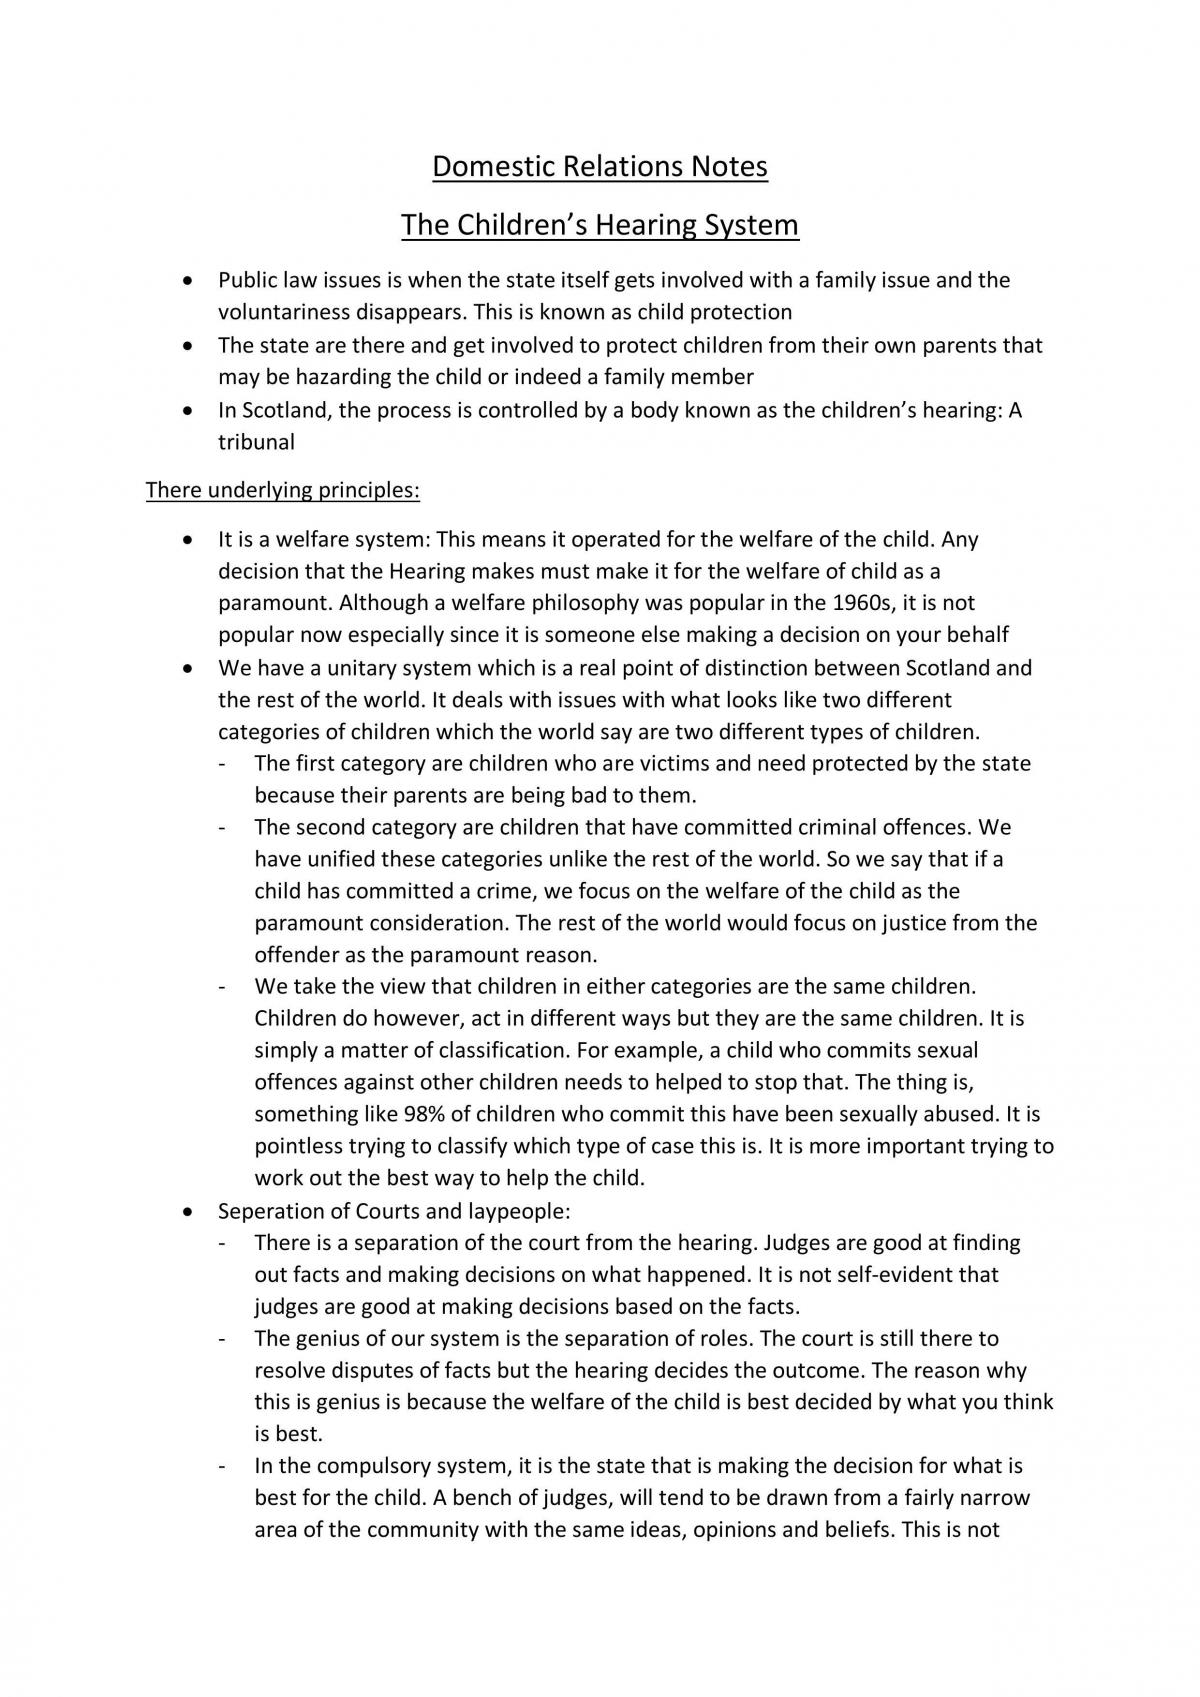 Full Domestic Relations notes  - Page 1